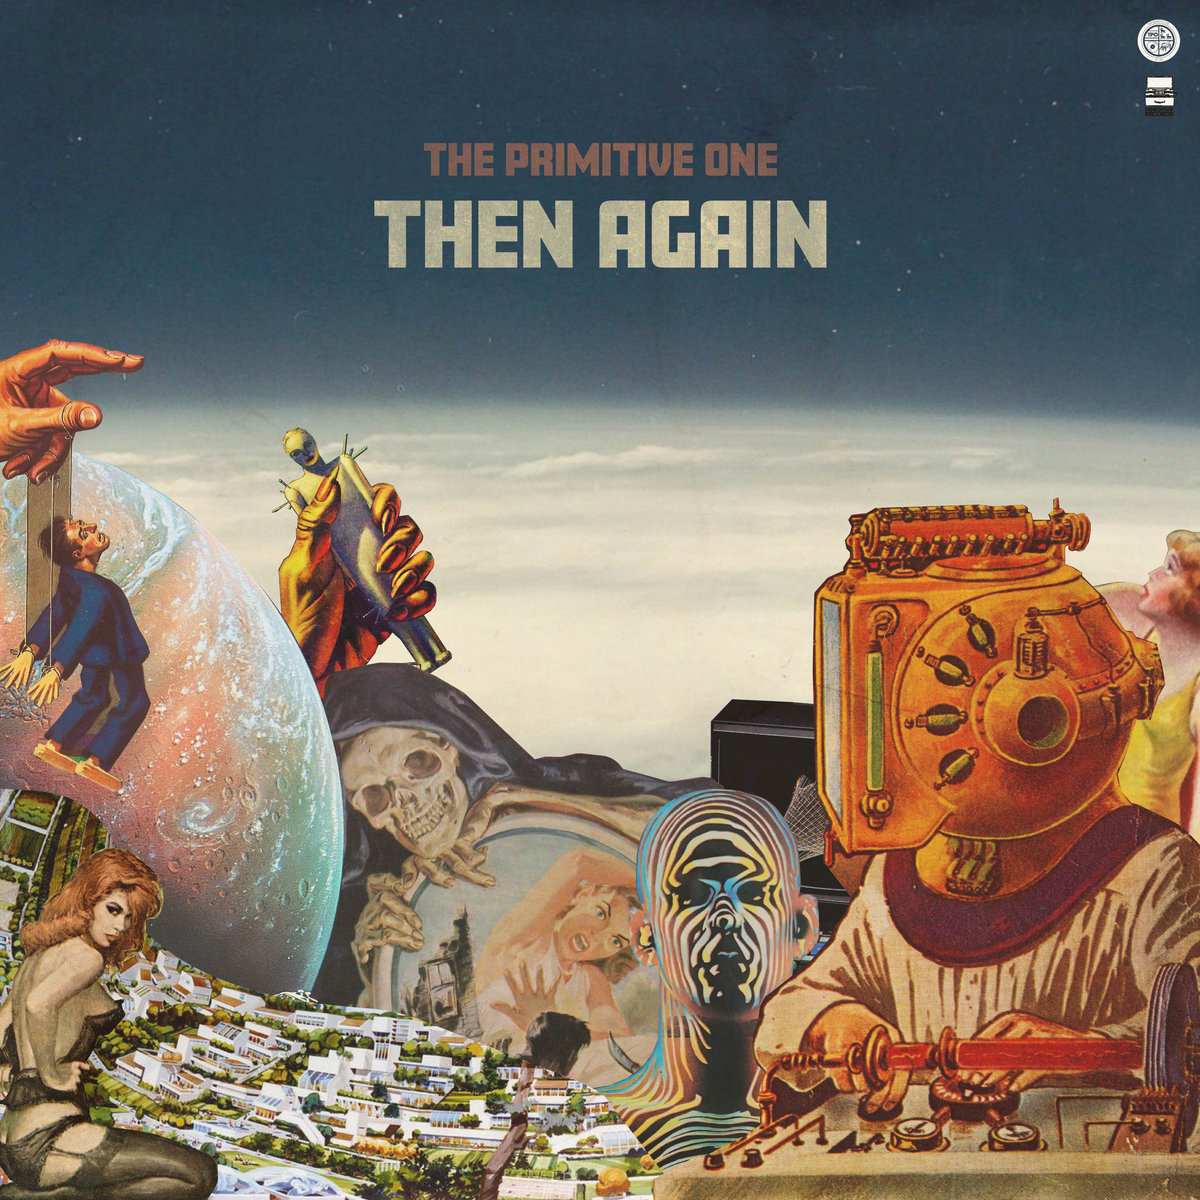 Then_again_the_primitive_one